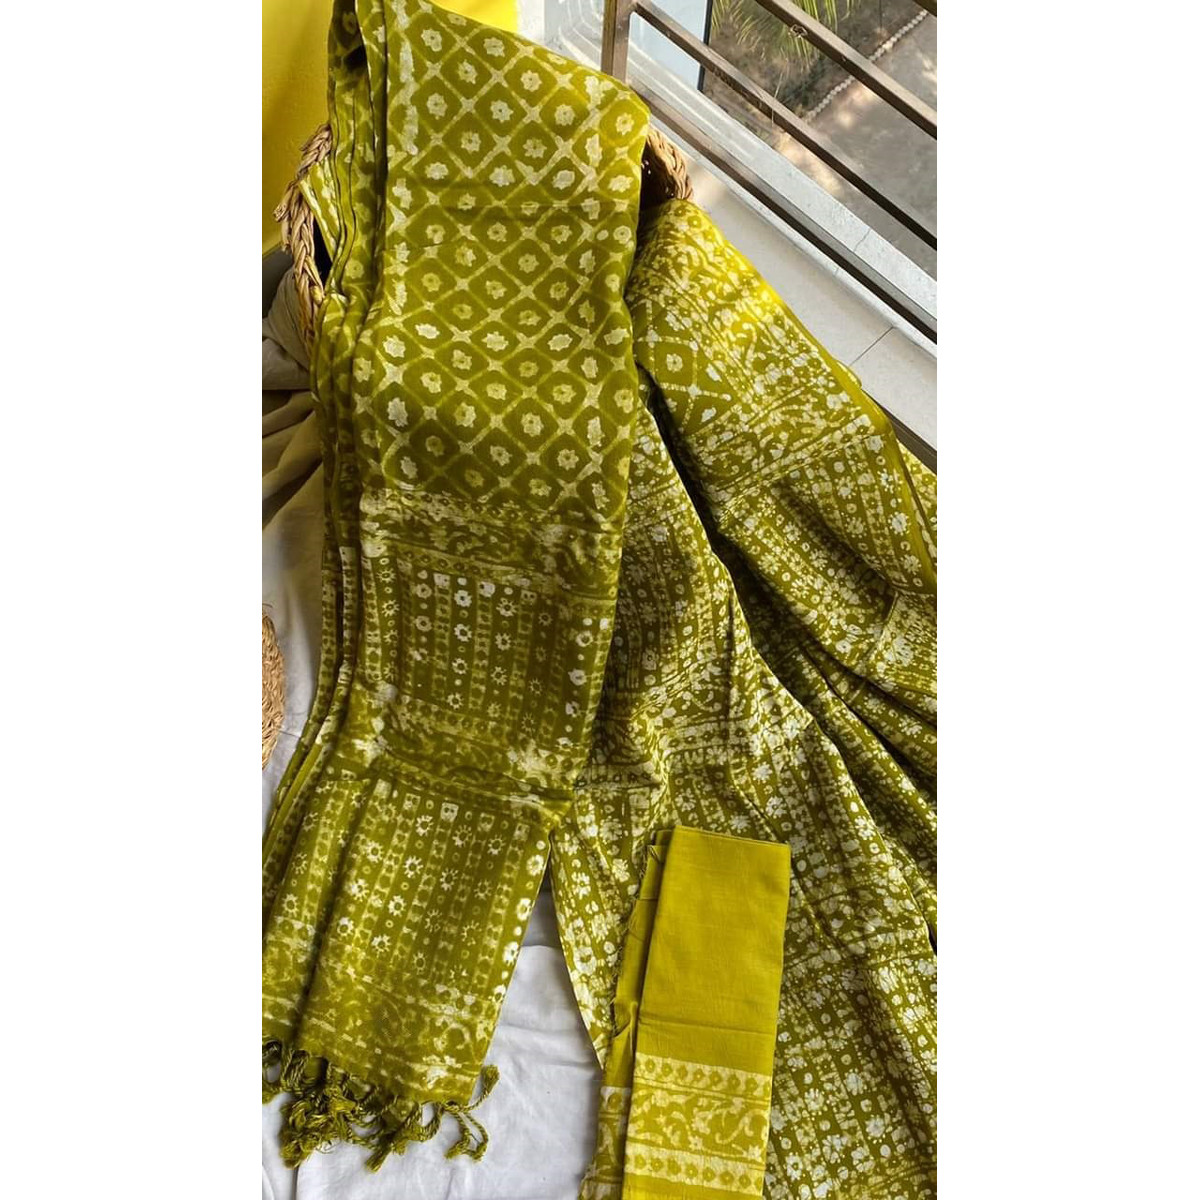 Exciusive Natural Vegetable Dye Saree with Blouse Piece